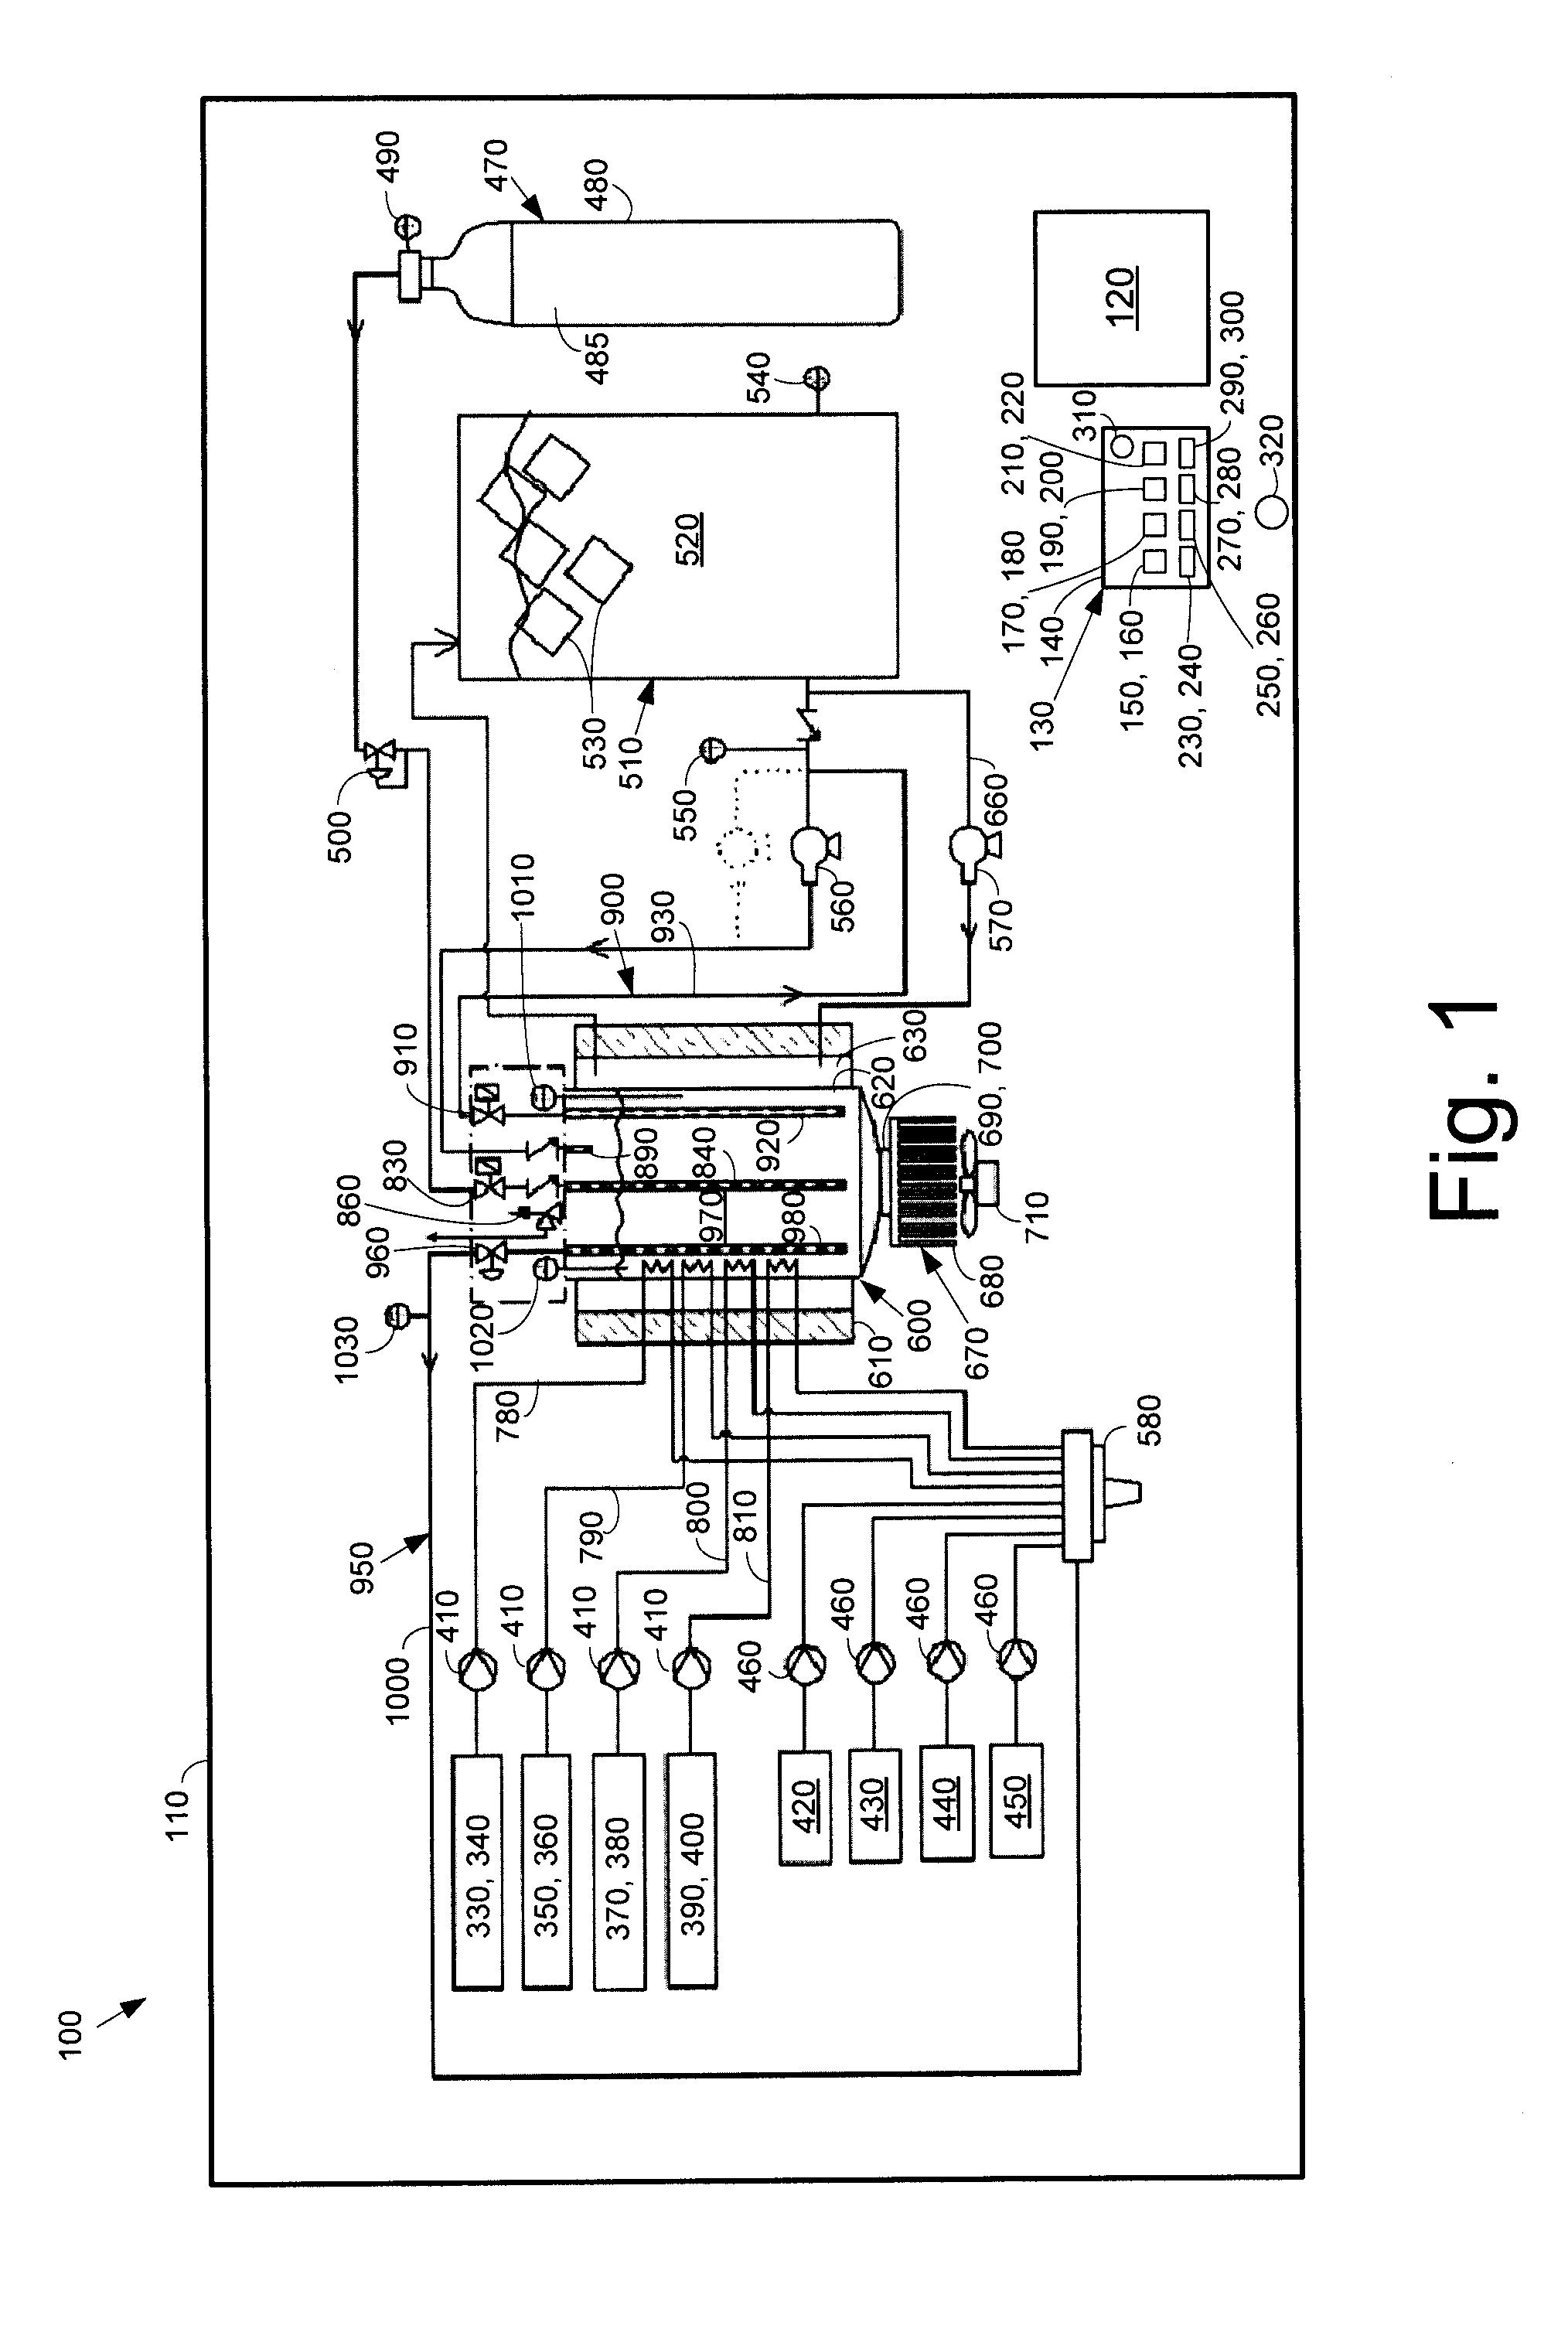 Beverage Dispenser with Integrated Carbonator and a Potable Water/Ice Slurry Refrigeration System